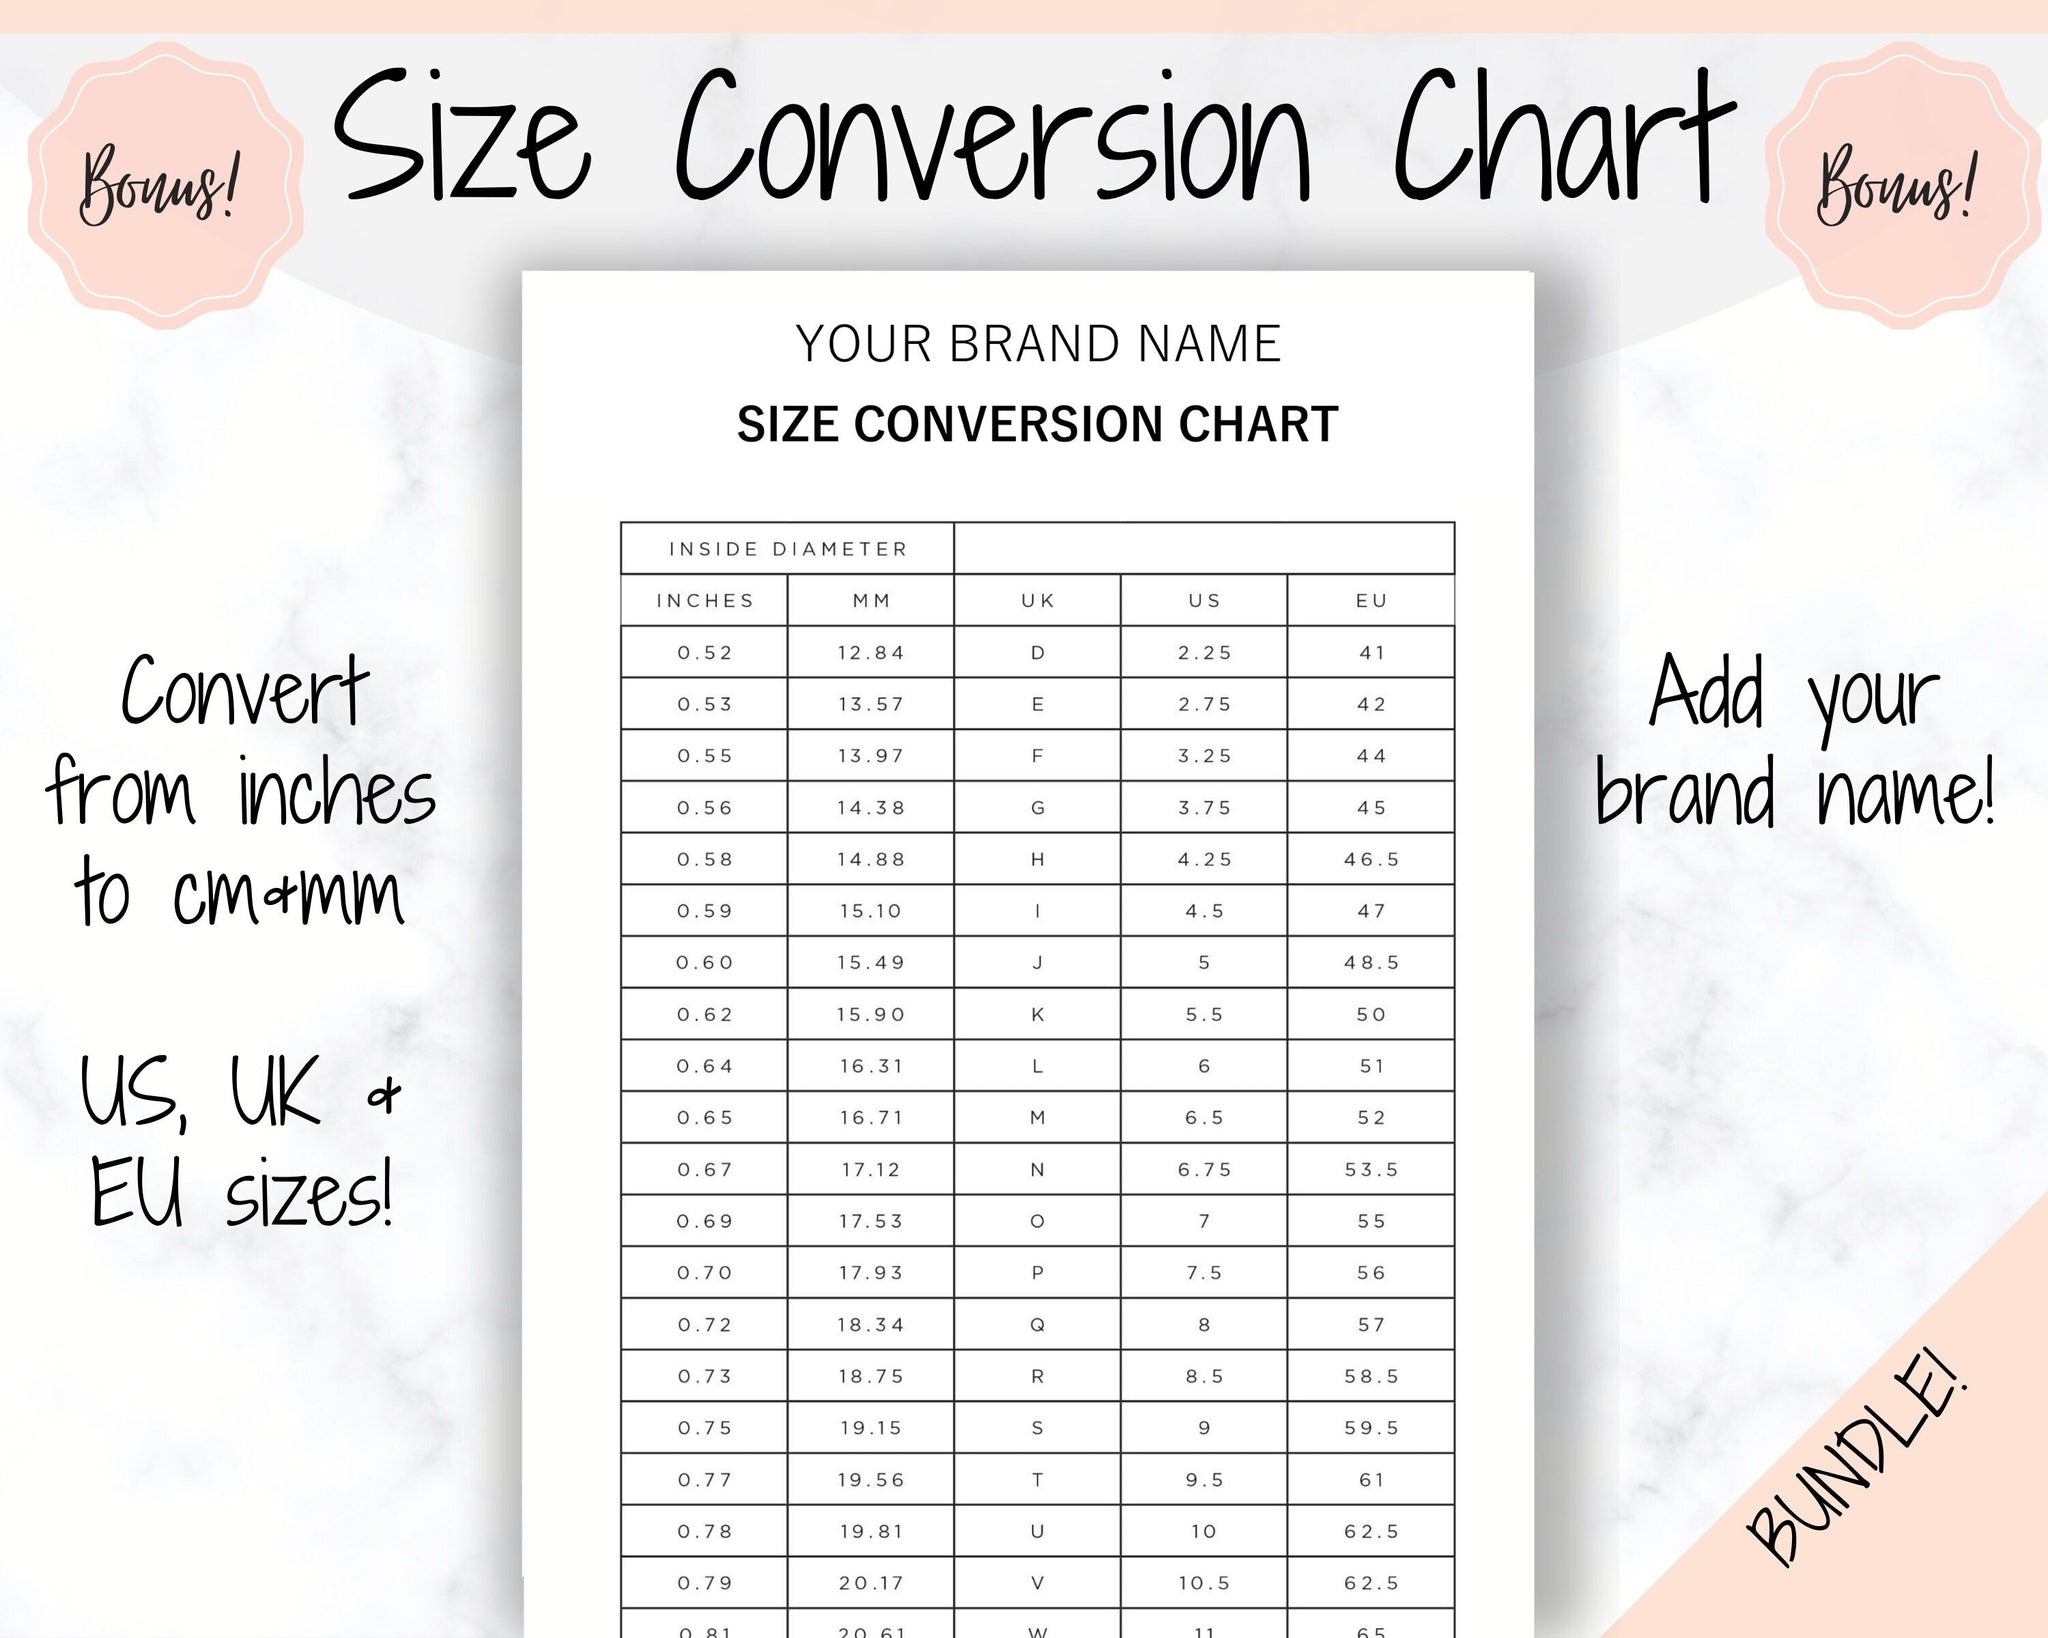 Ring Size Guide & Conversion Chart